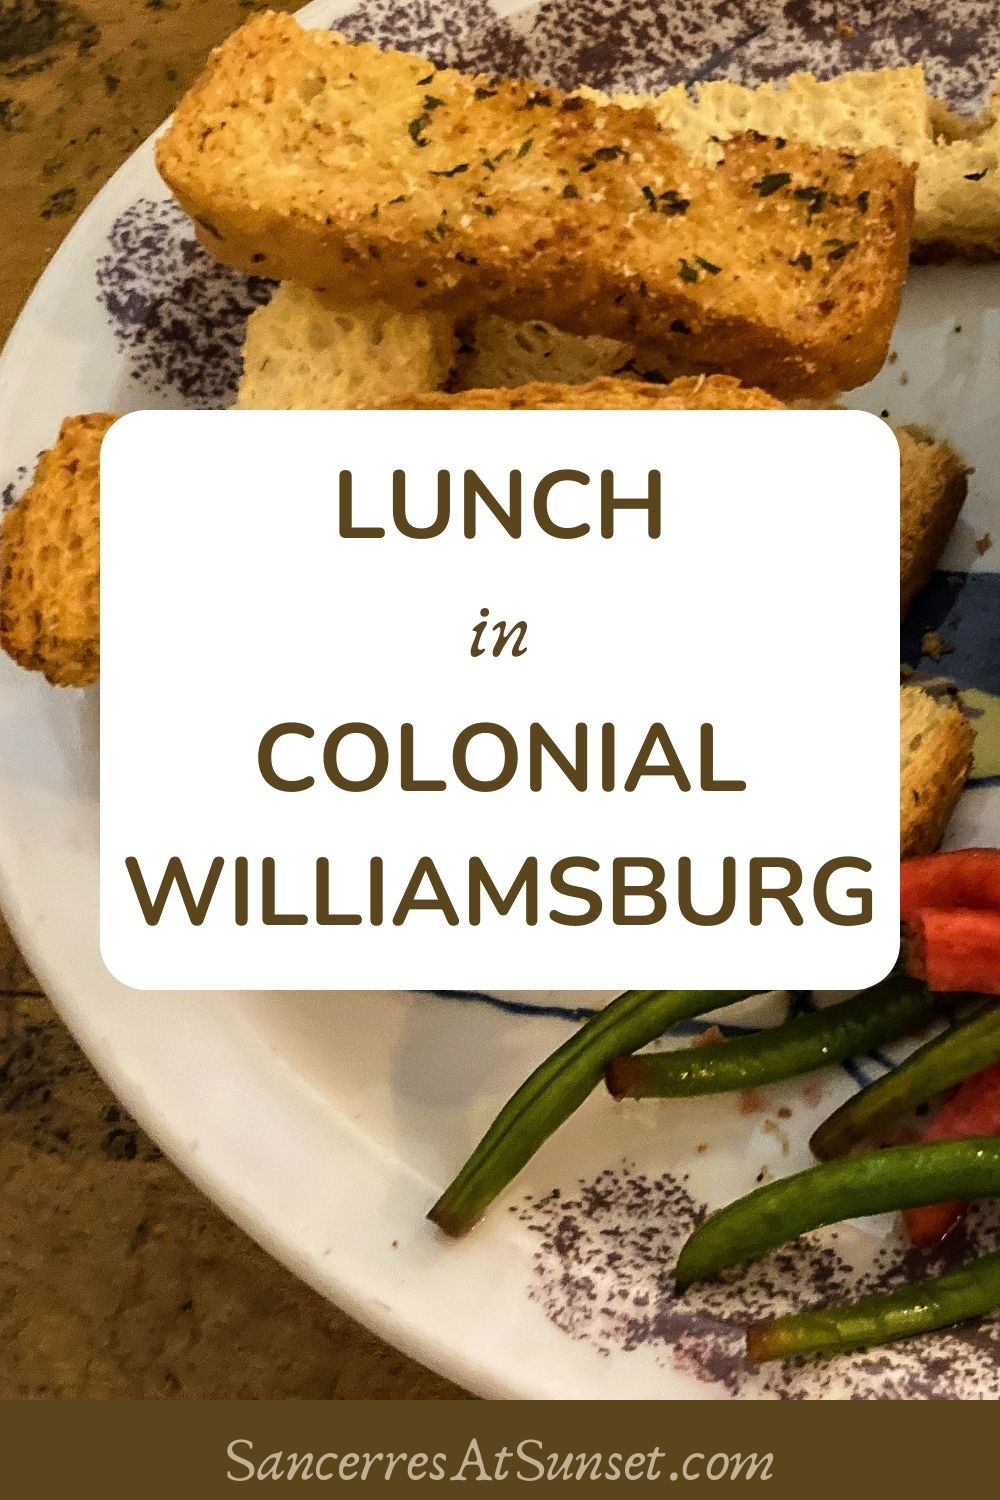 Lunch in Colonial Williamsburg